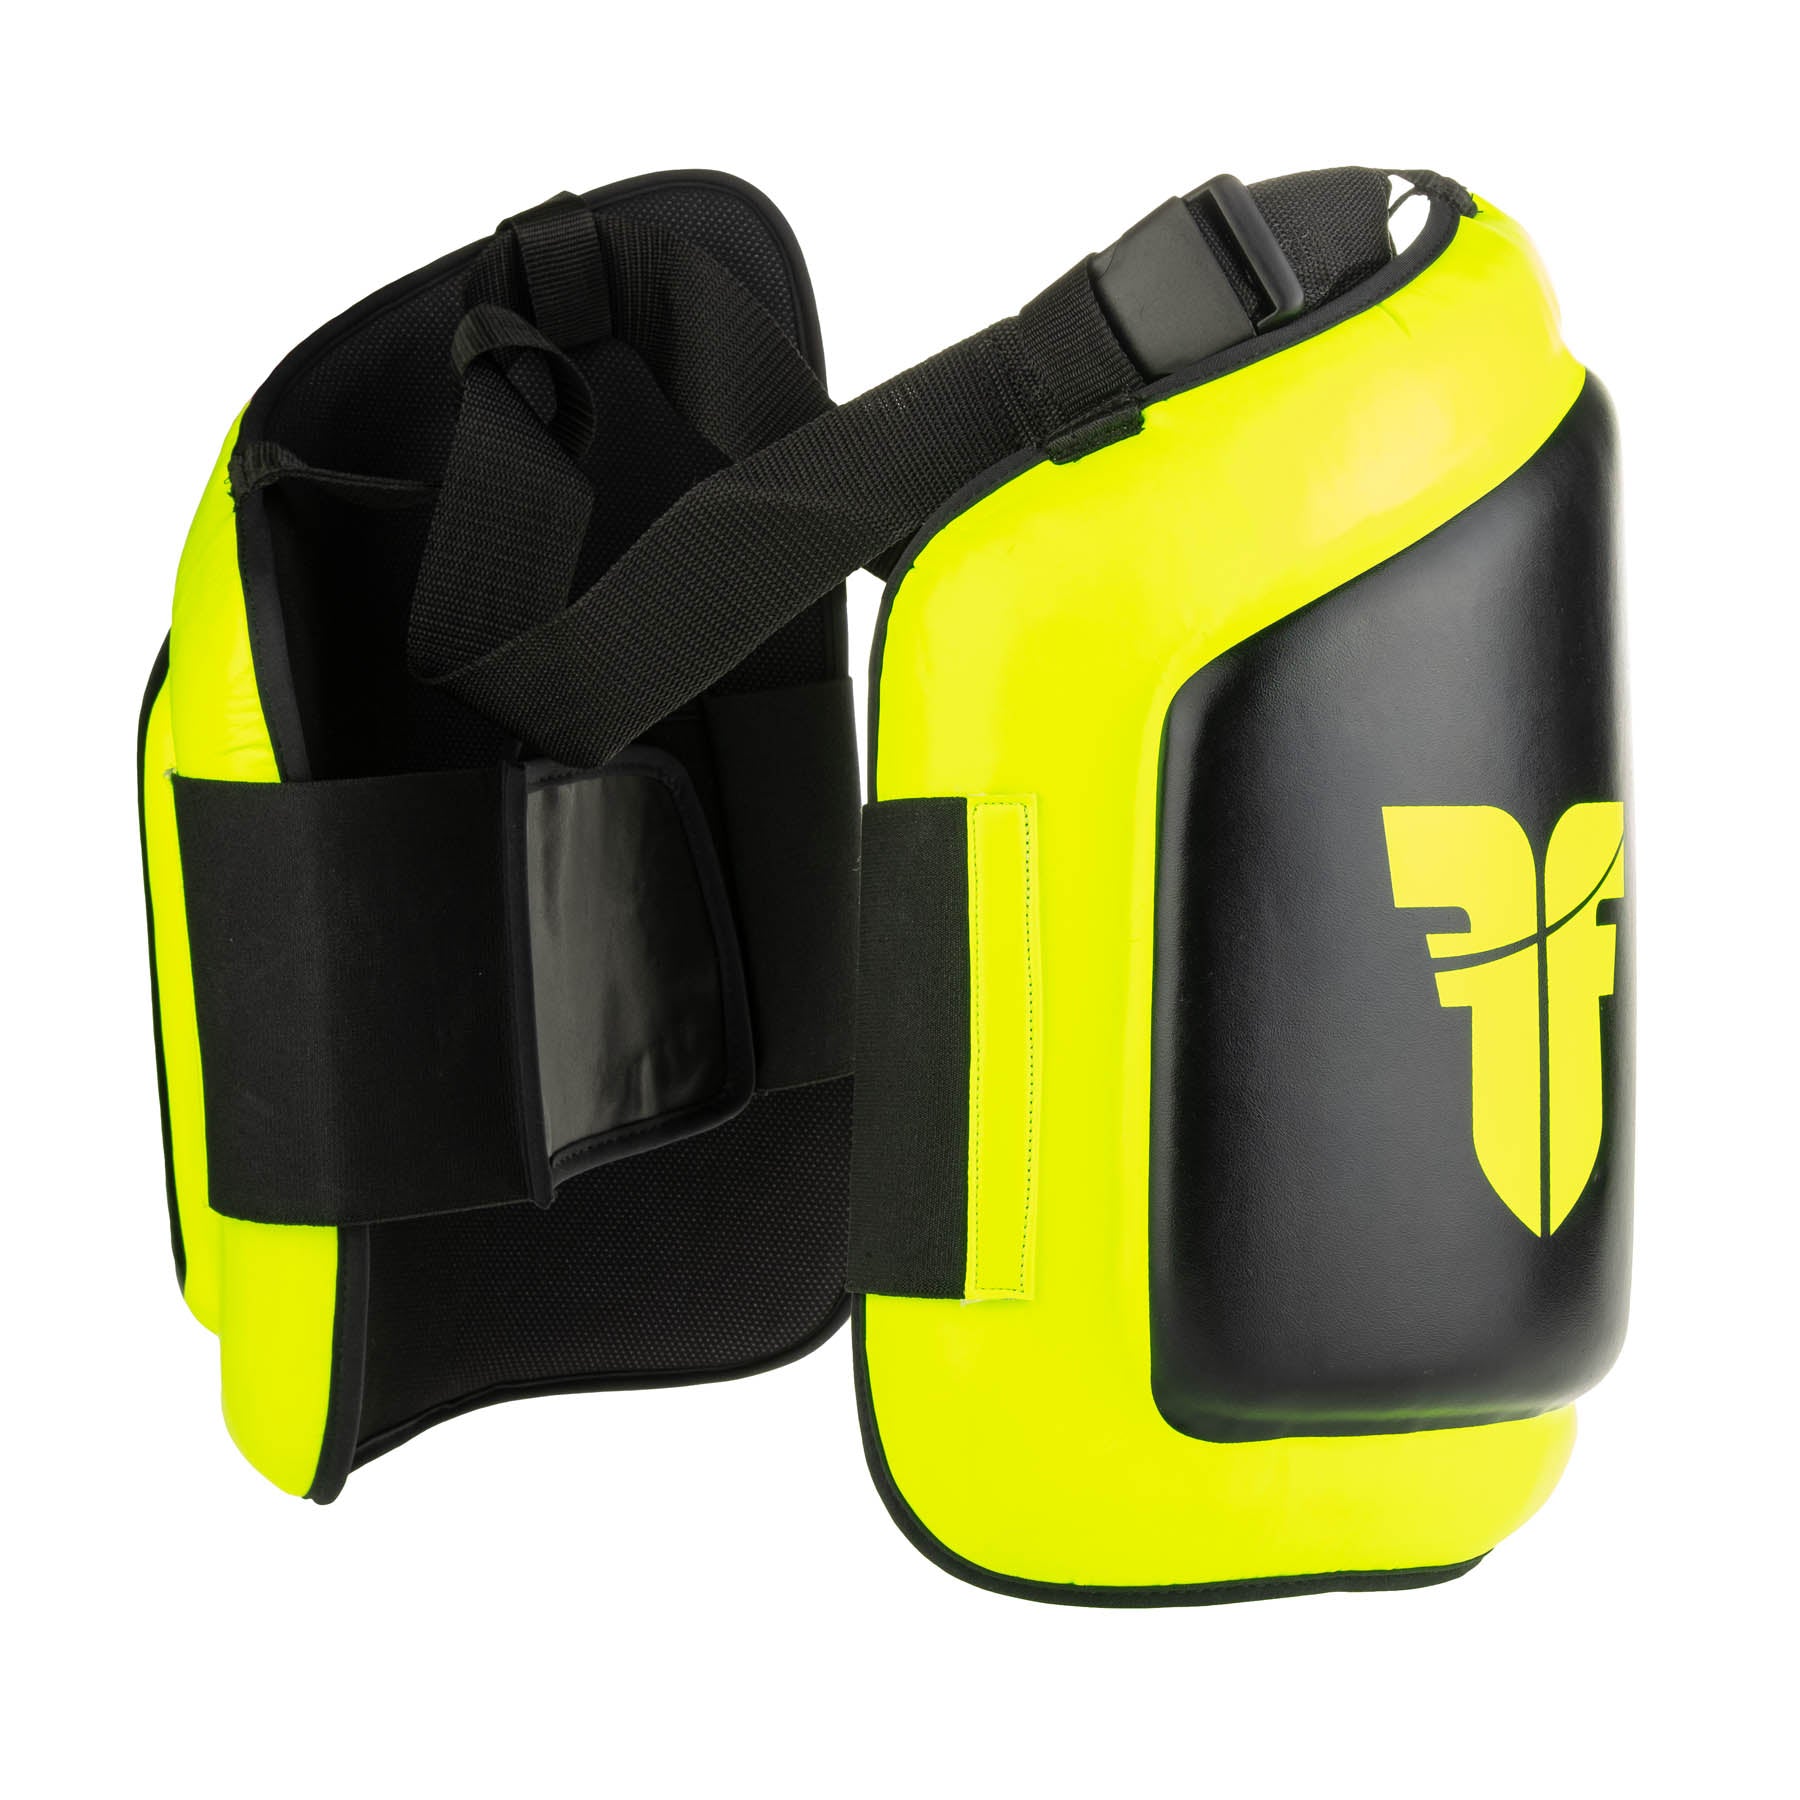 Fighter Thigh Pads - black/yellow